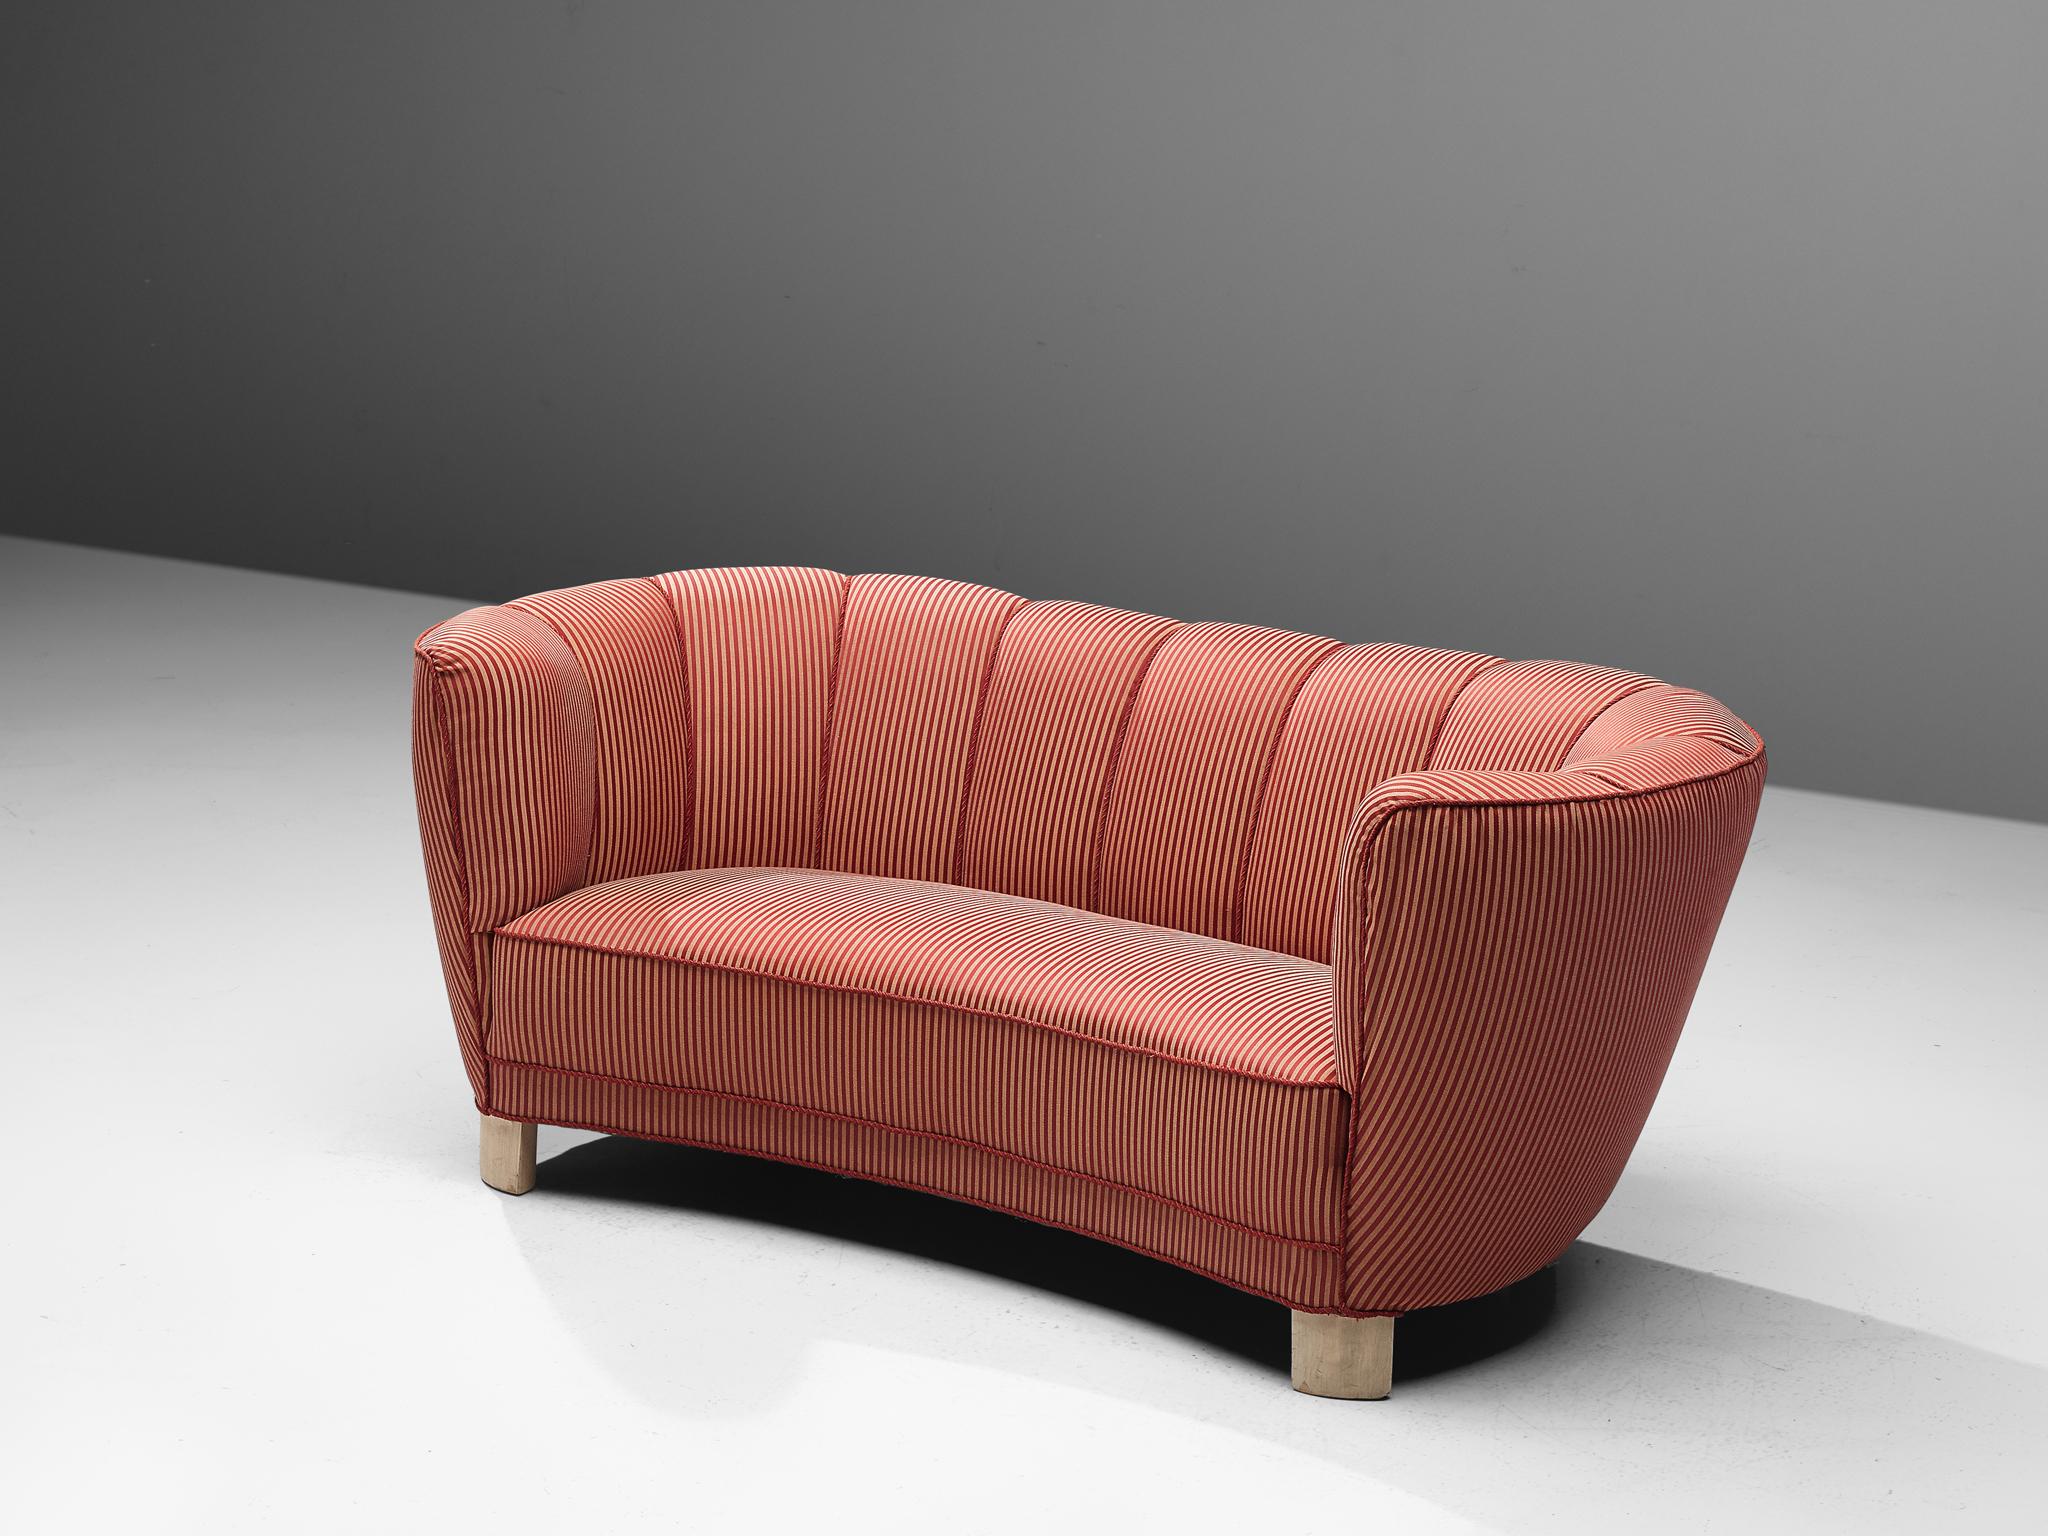 Banana sofa, fabric, wood, Denmark, 1940s.

This voluptuous sofa is executed in a striped red fabric with wooden legs. The sofa has a high lined and curved back, while the backrest is horizontal straight and flows over into the bulky, rounded